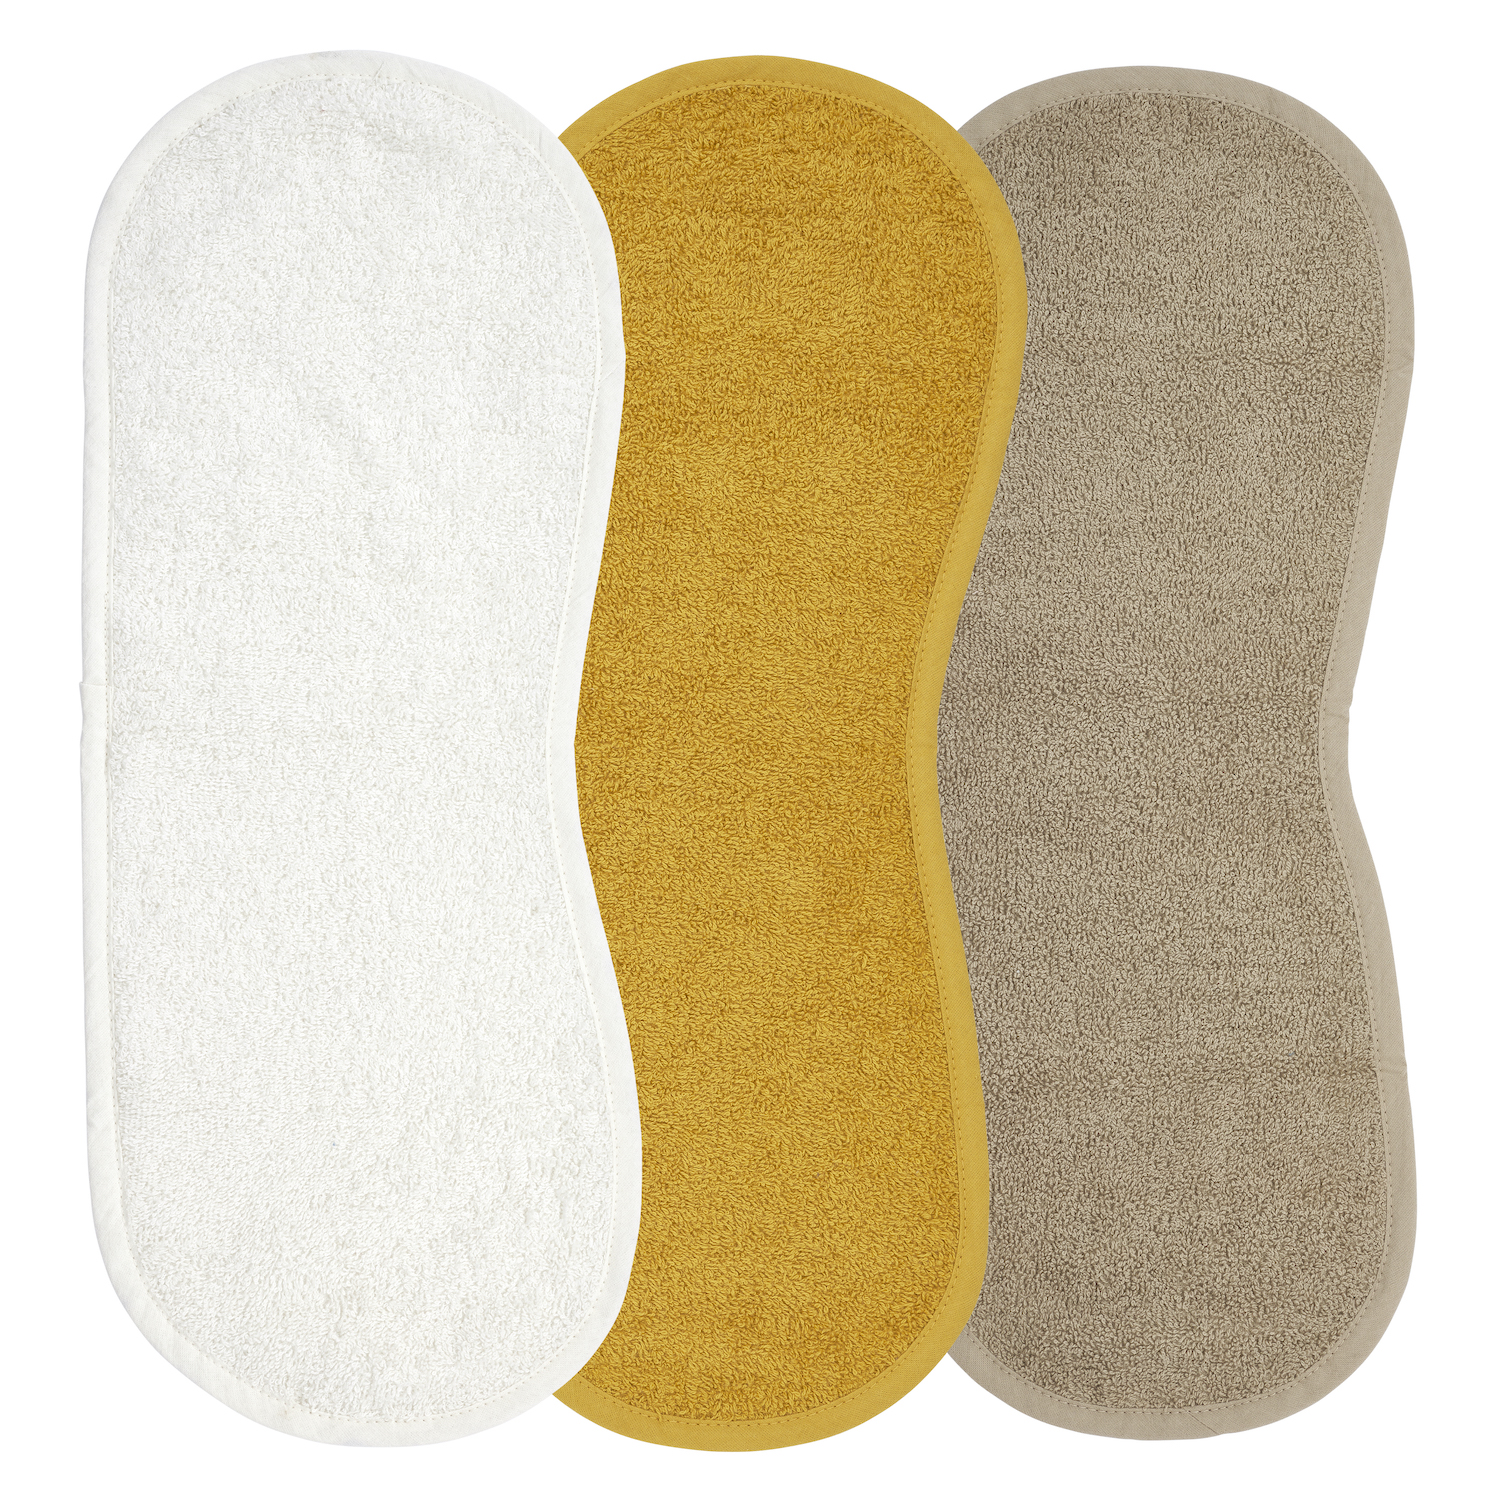 Basic Terry Burp Cloths Shoulder Model 3-pack  - Offwhite/Honey Gold/Taupe - 53x20cm